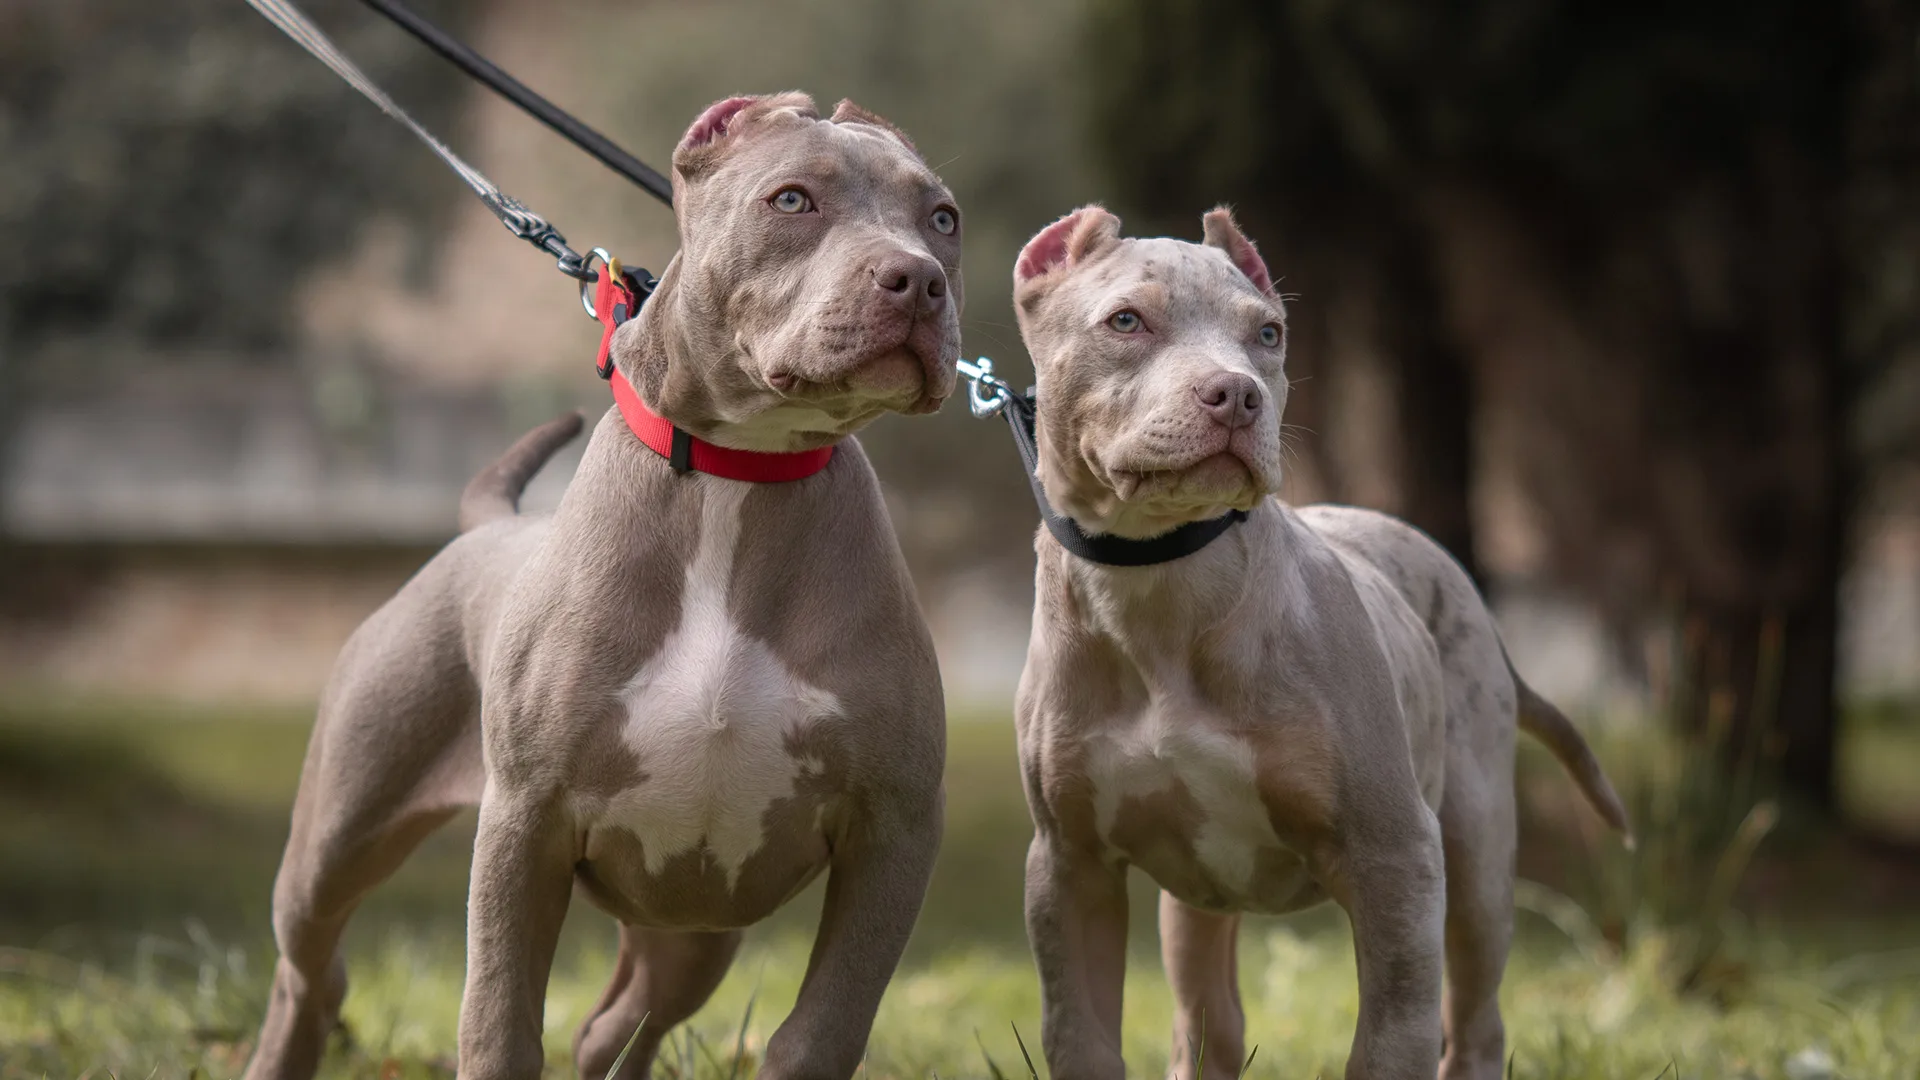 XL bully dogs banned from end of year after surge in attacks